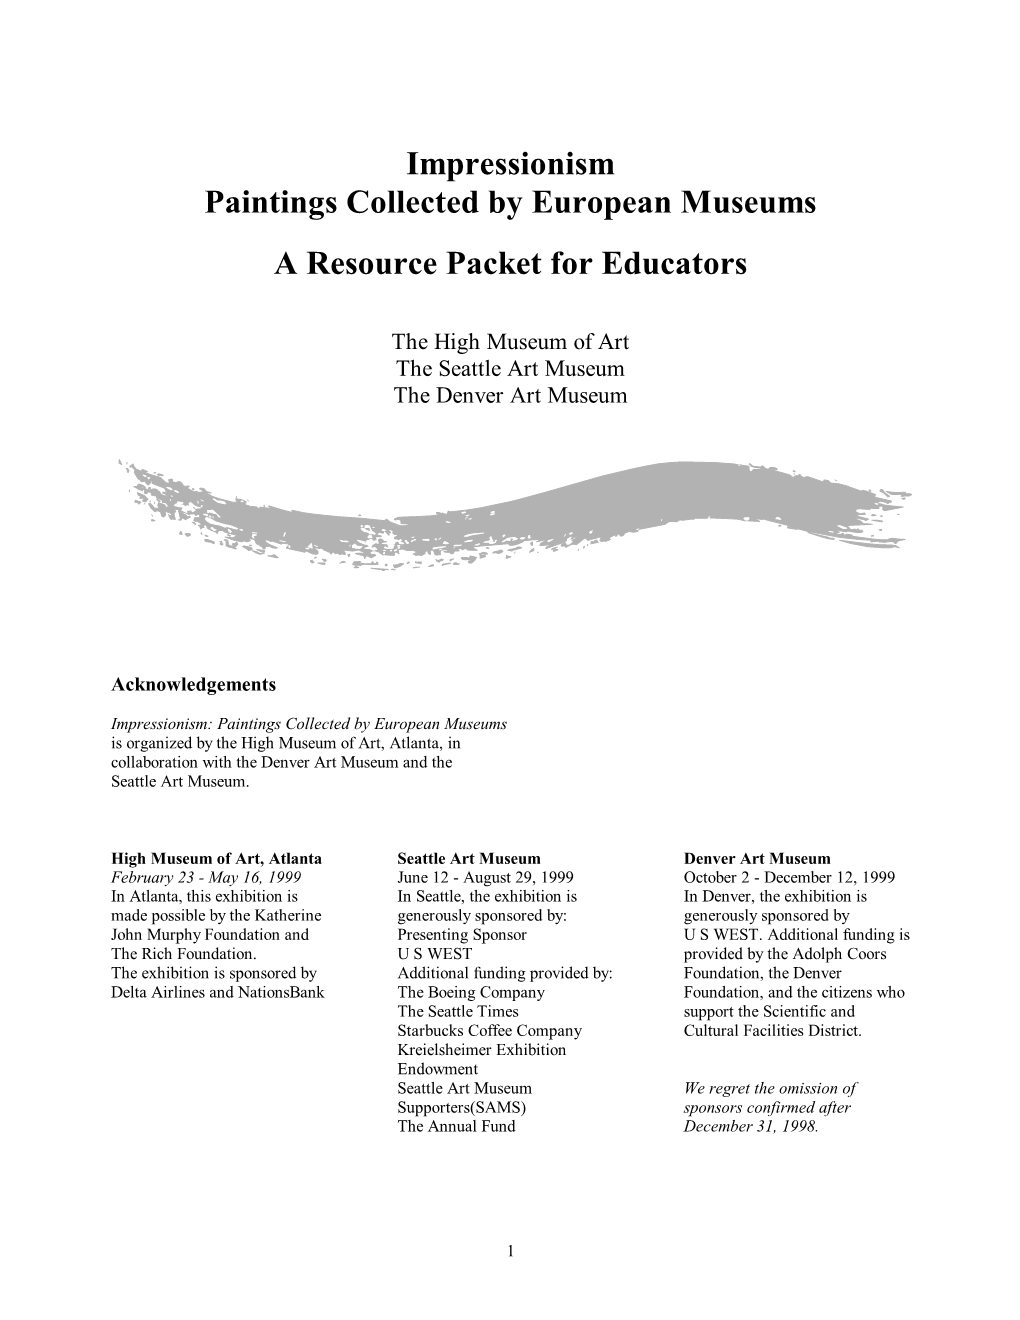 Impressionism Paintings Collected by European Museums a Resource Packet for Educators